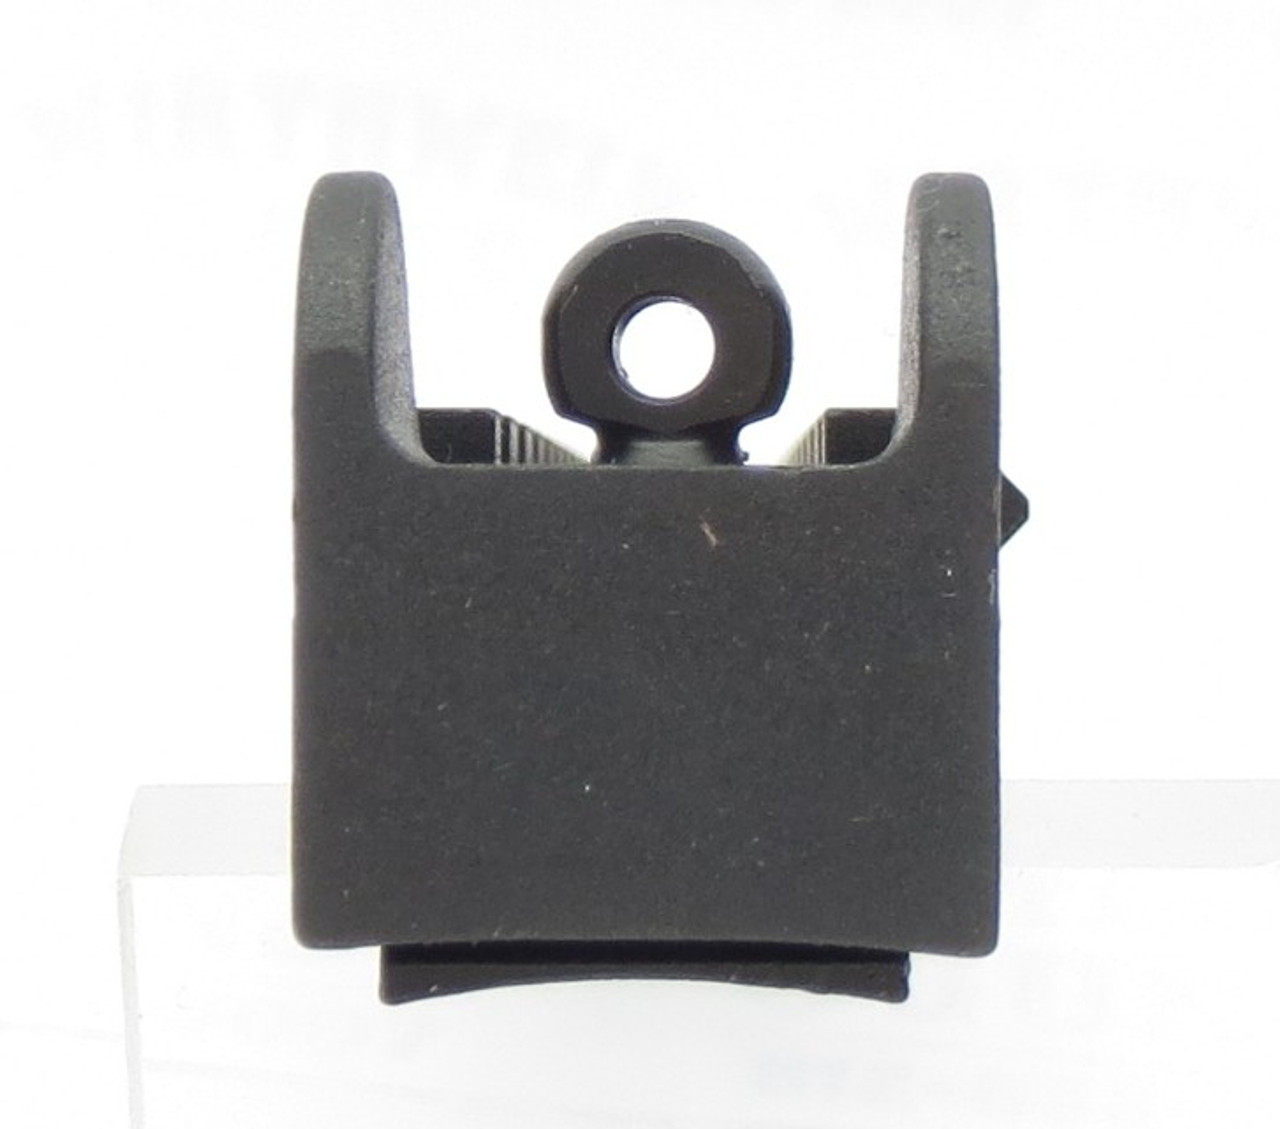 Ruger Rear Peep Sight Rail model 21138 View